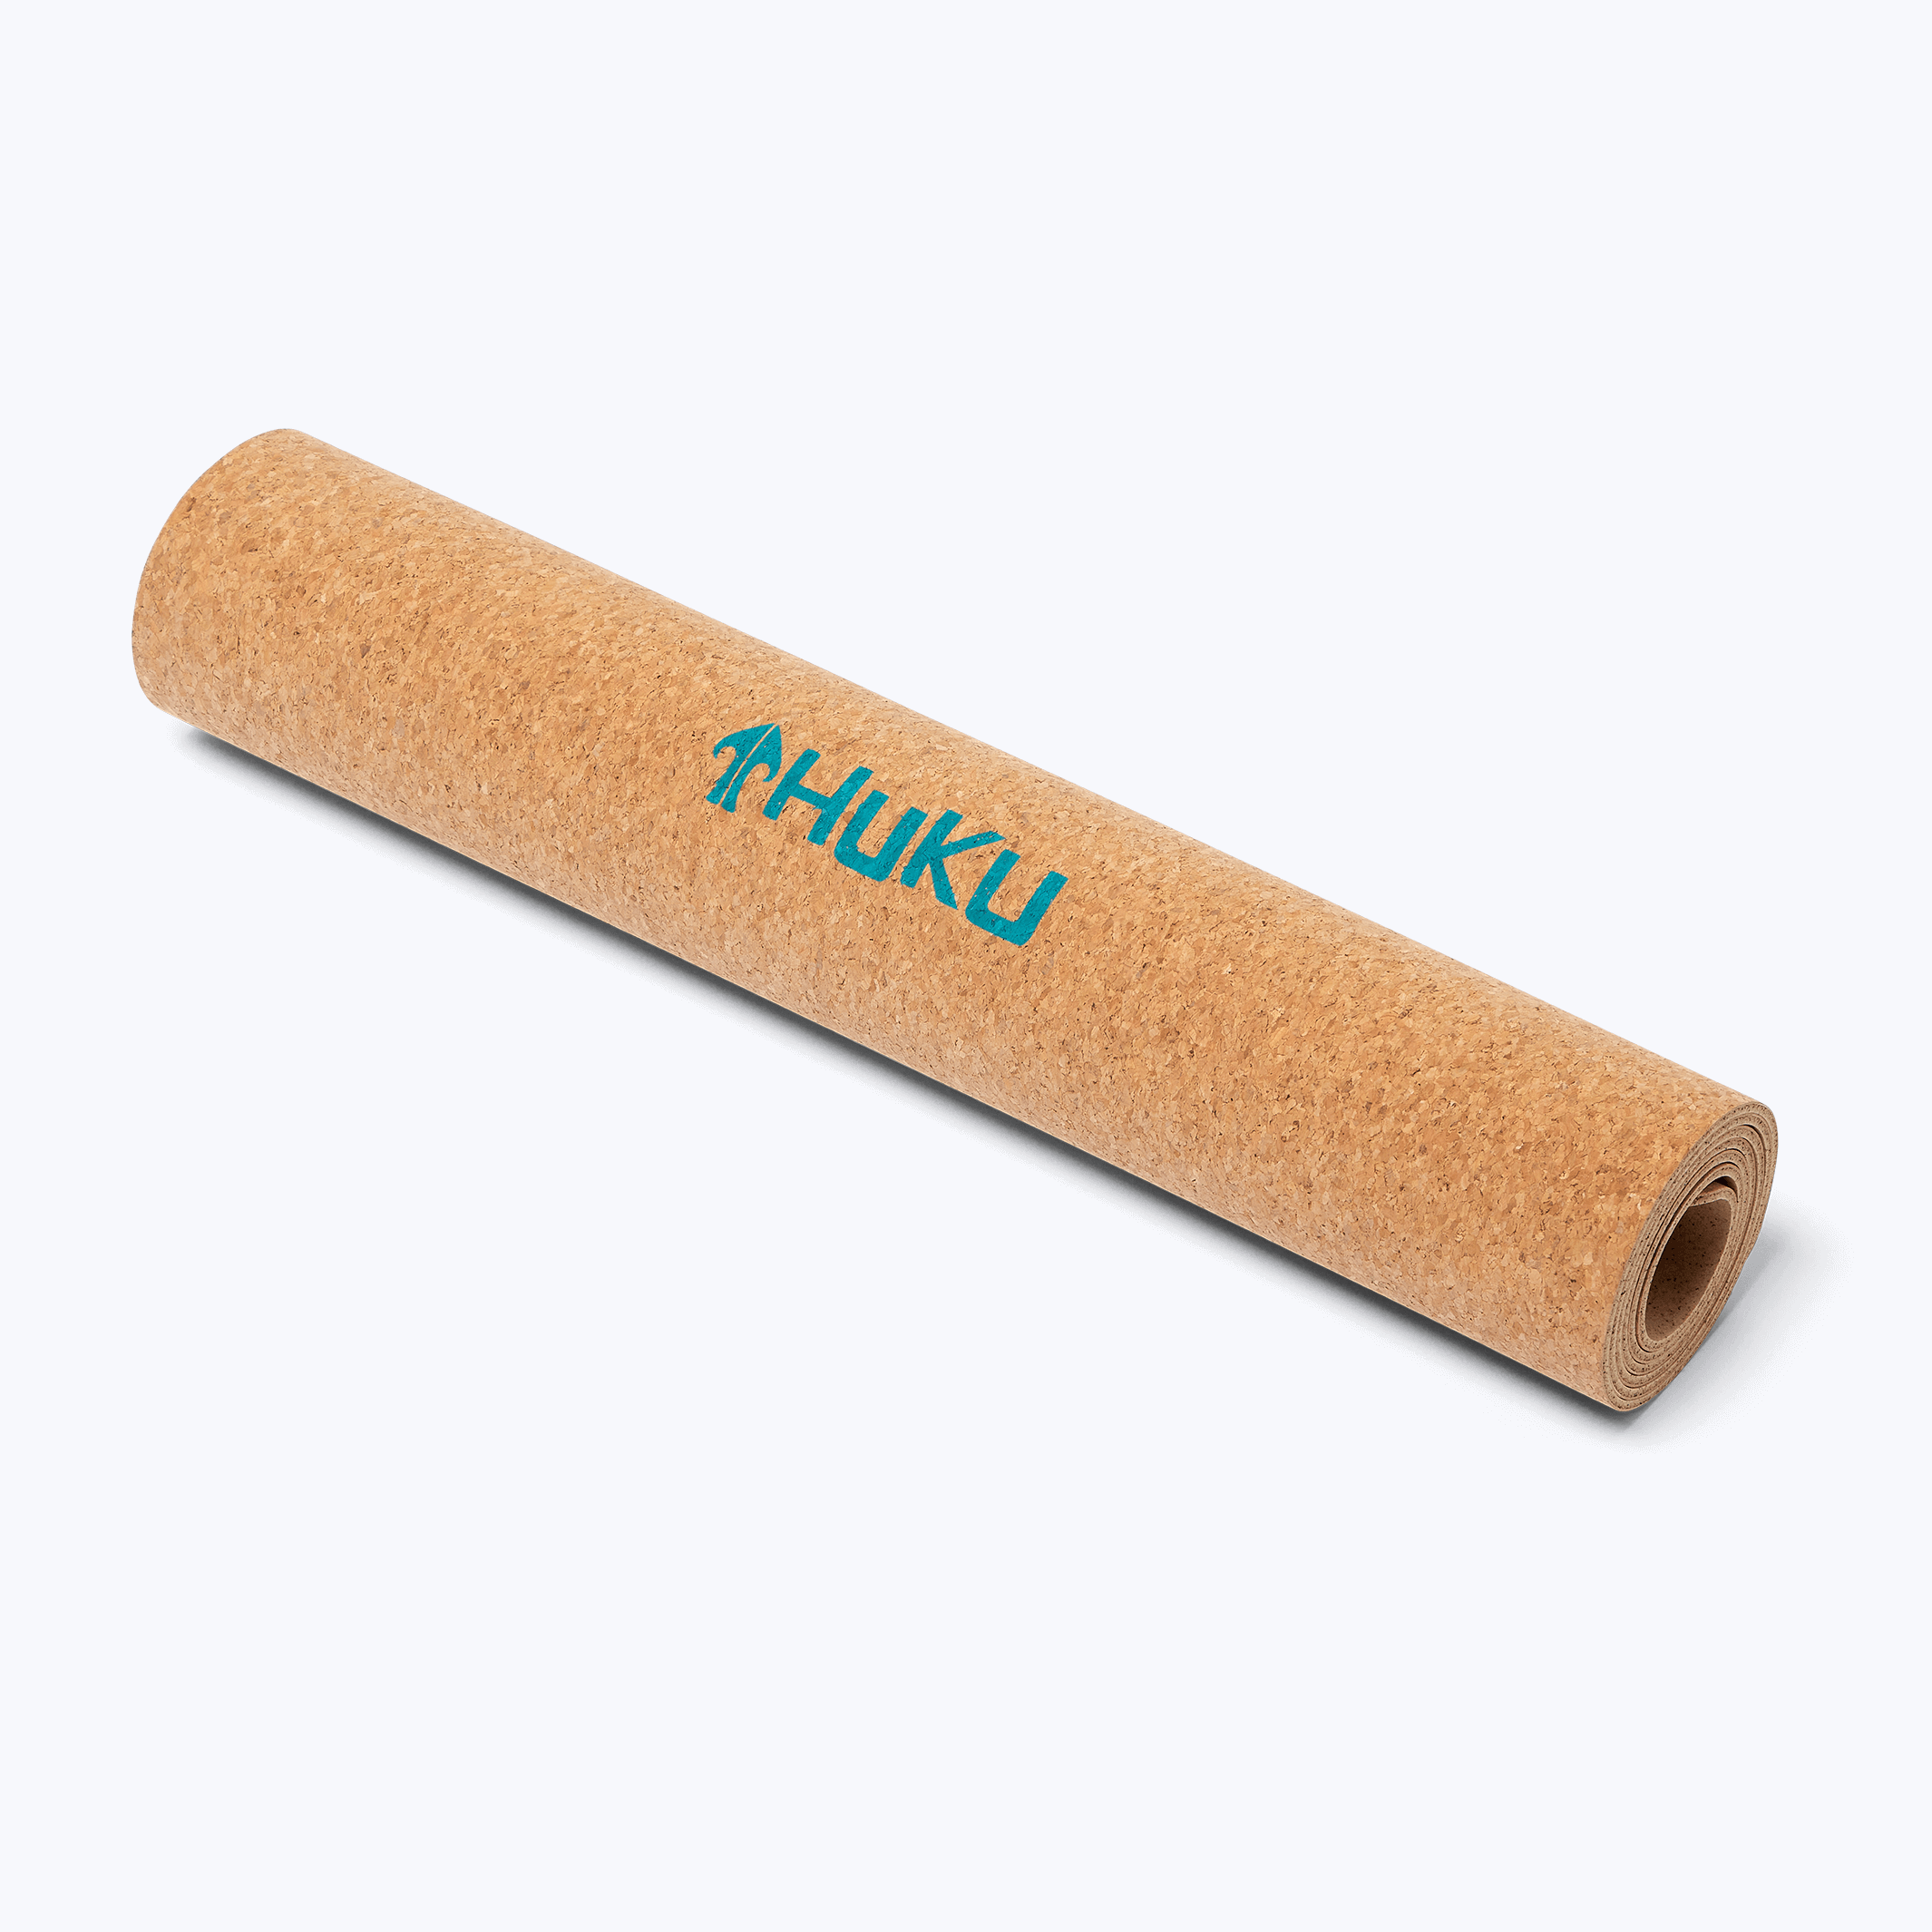 Experience the natural comfort of our Cork Yoga Mat. Made from eco-friendly cork, it offers excellent grip, durability, and a non-slip surface for your yoga practice.